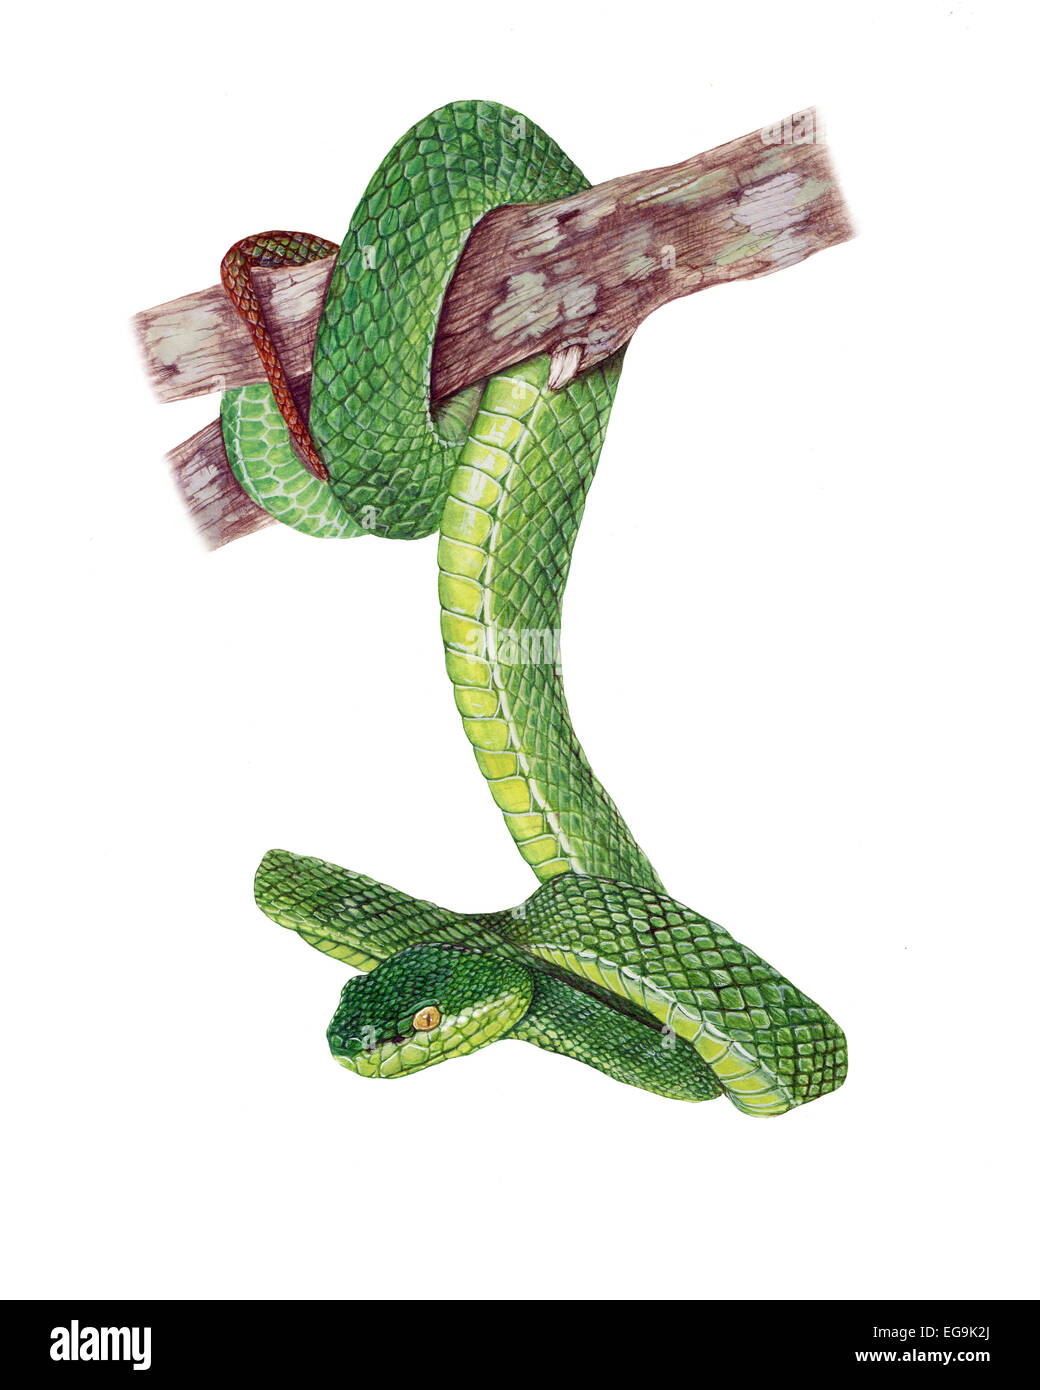 Green Pit Viper Watercolor Painting Stock Photo Alamy